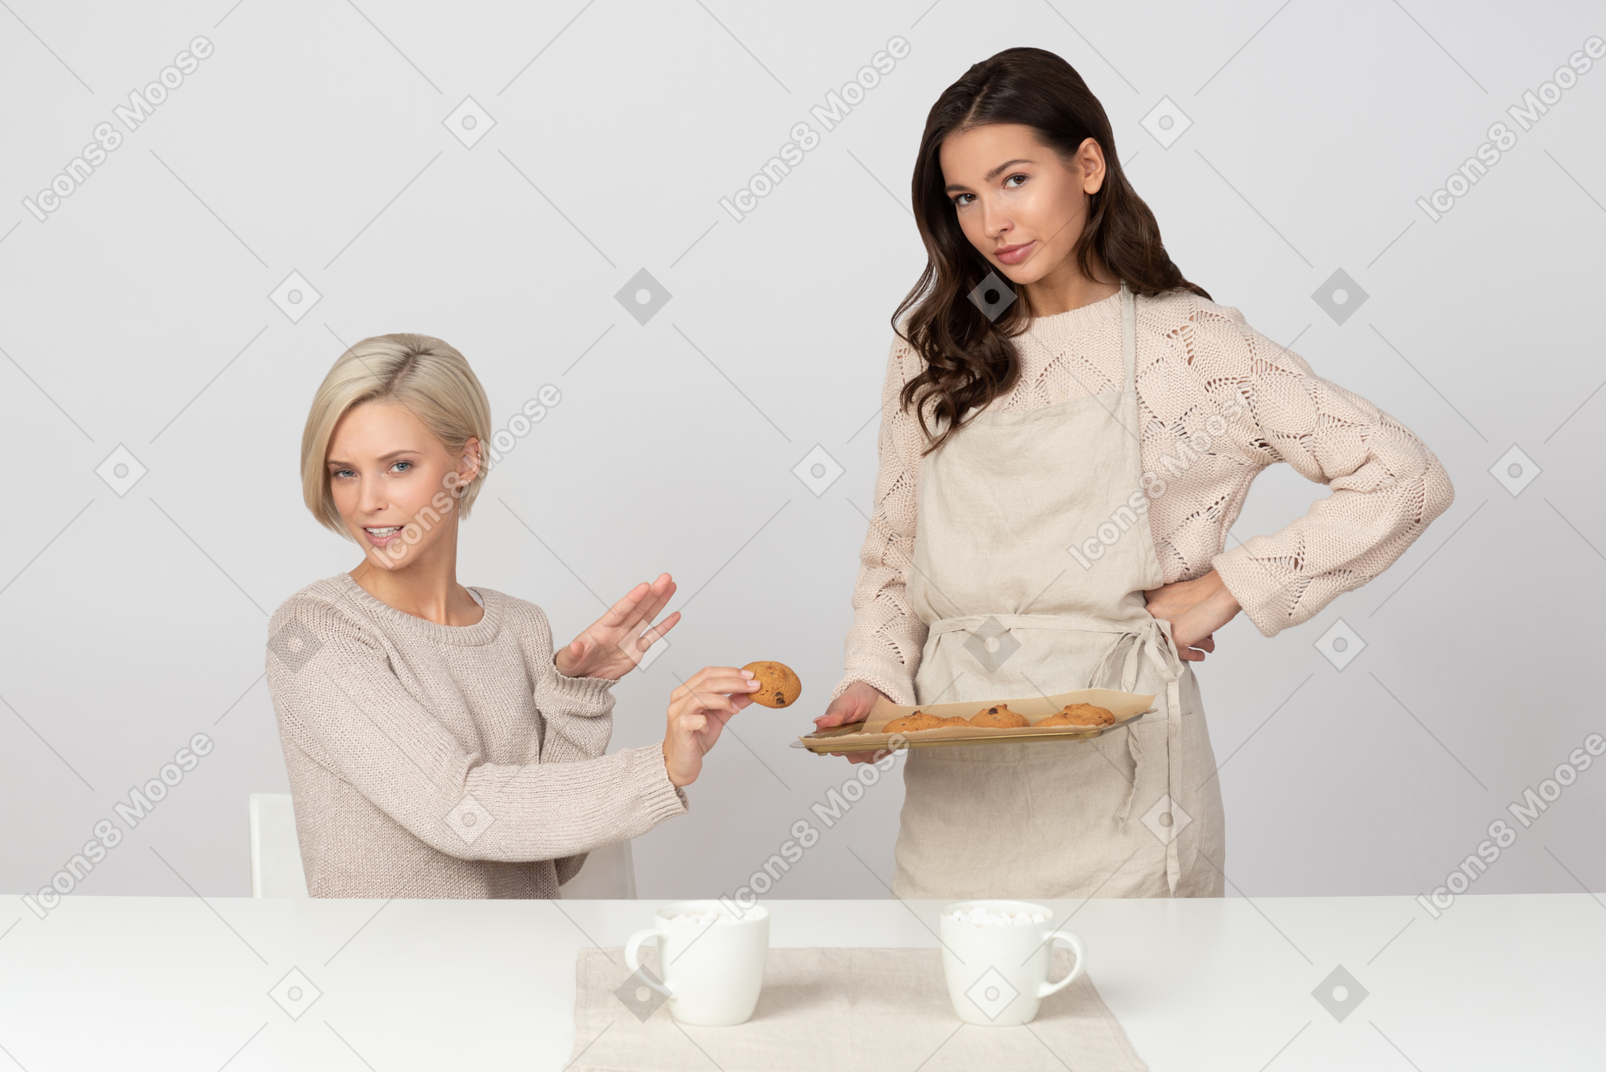 Young woman offering homemade cookies to her friend